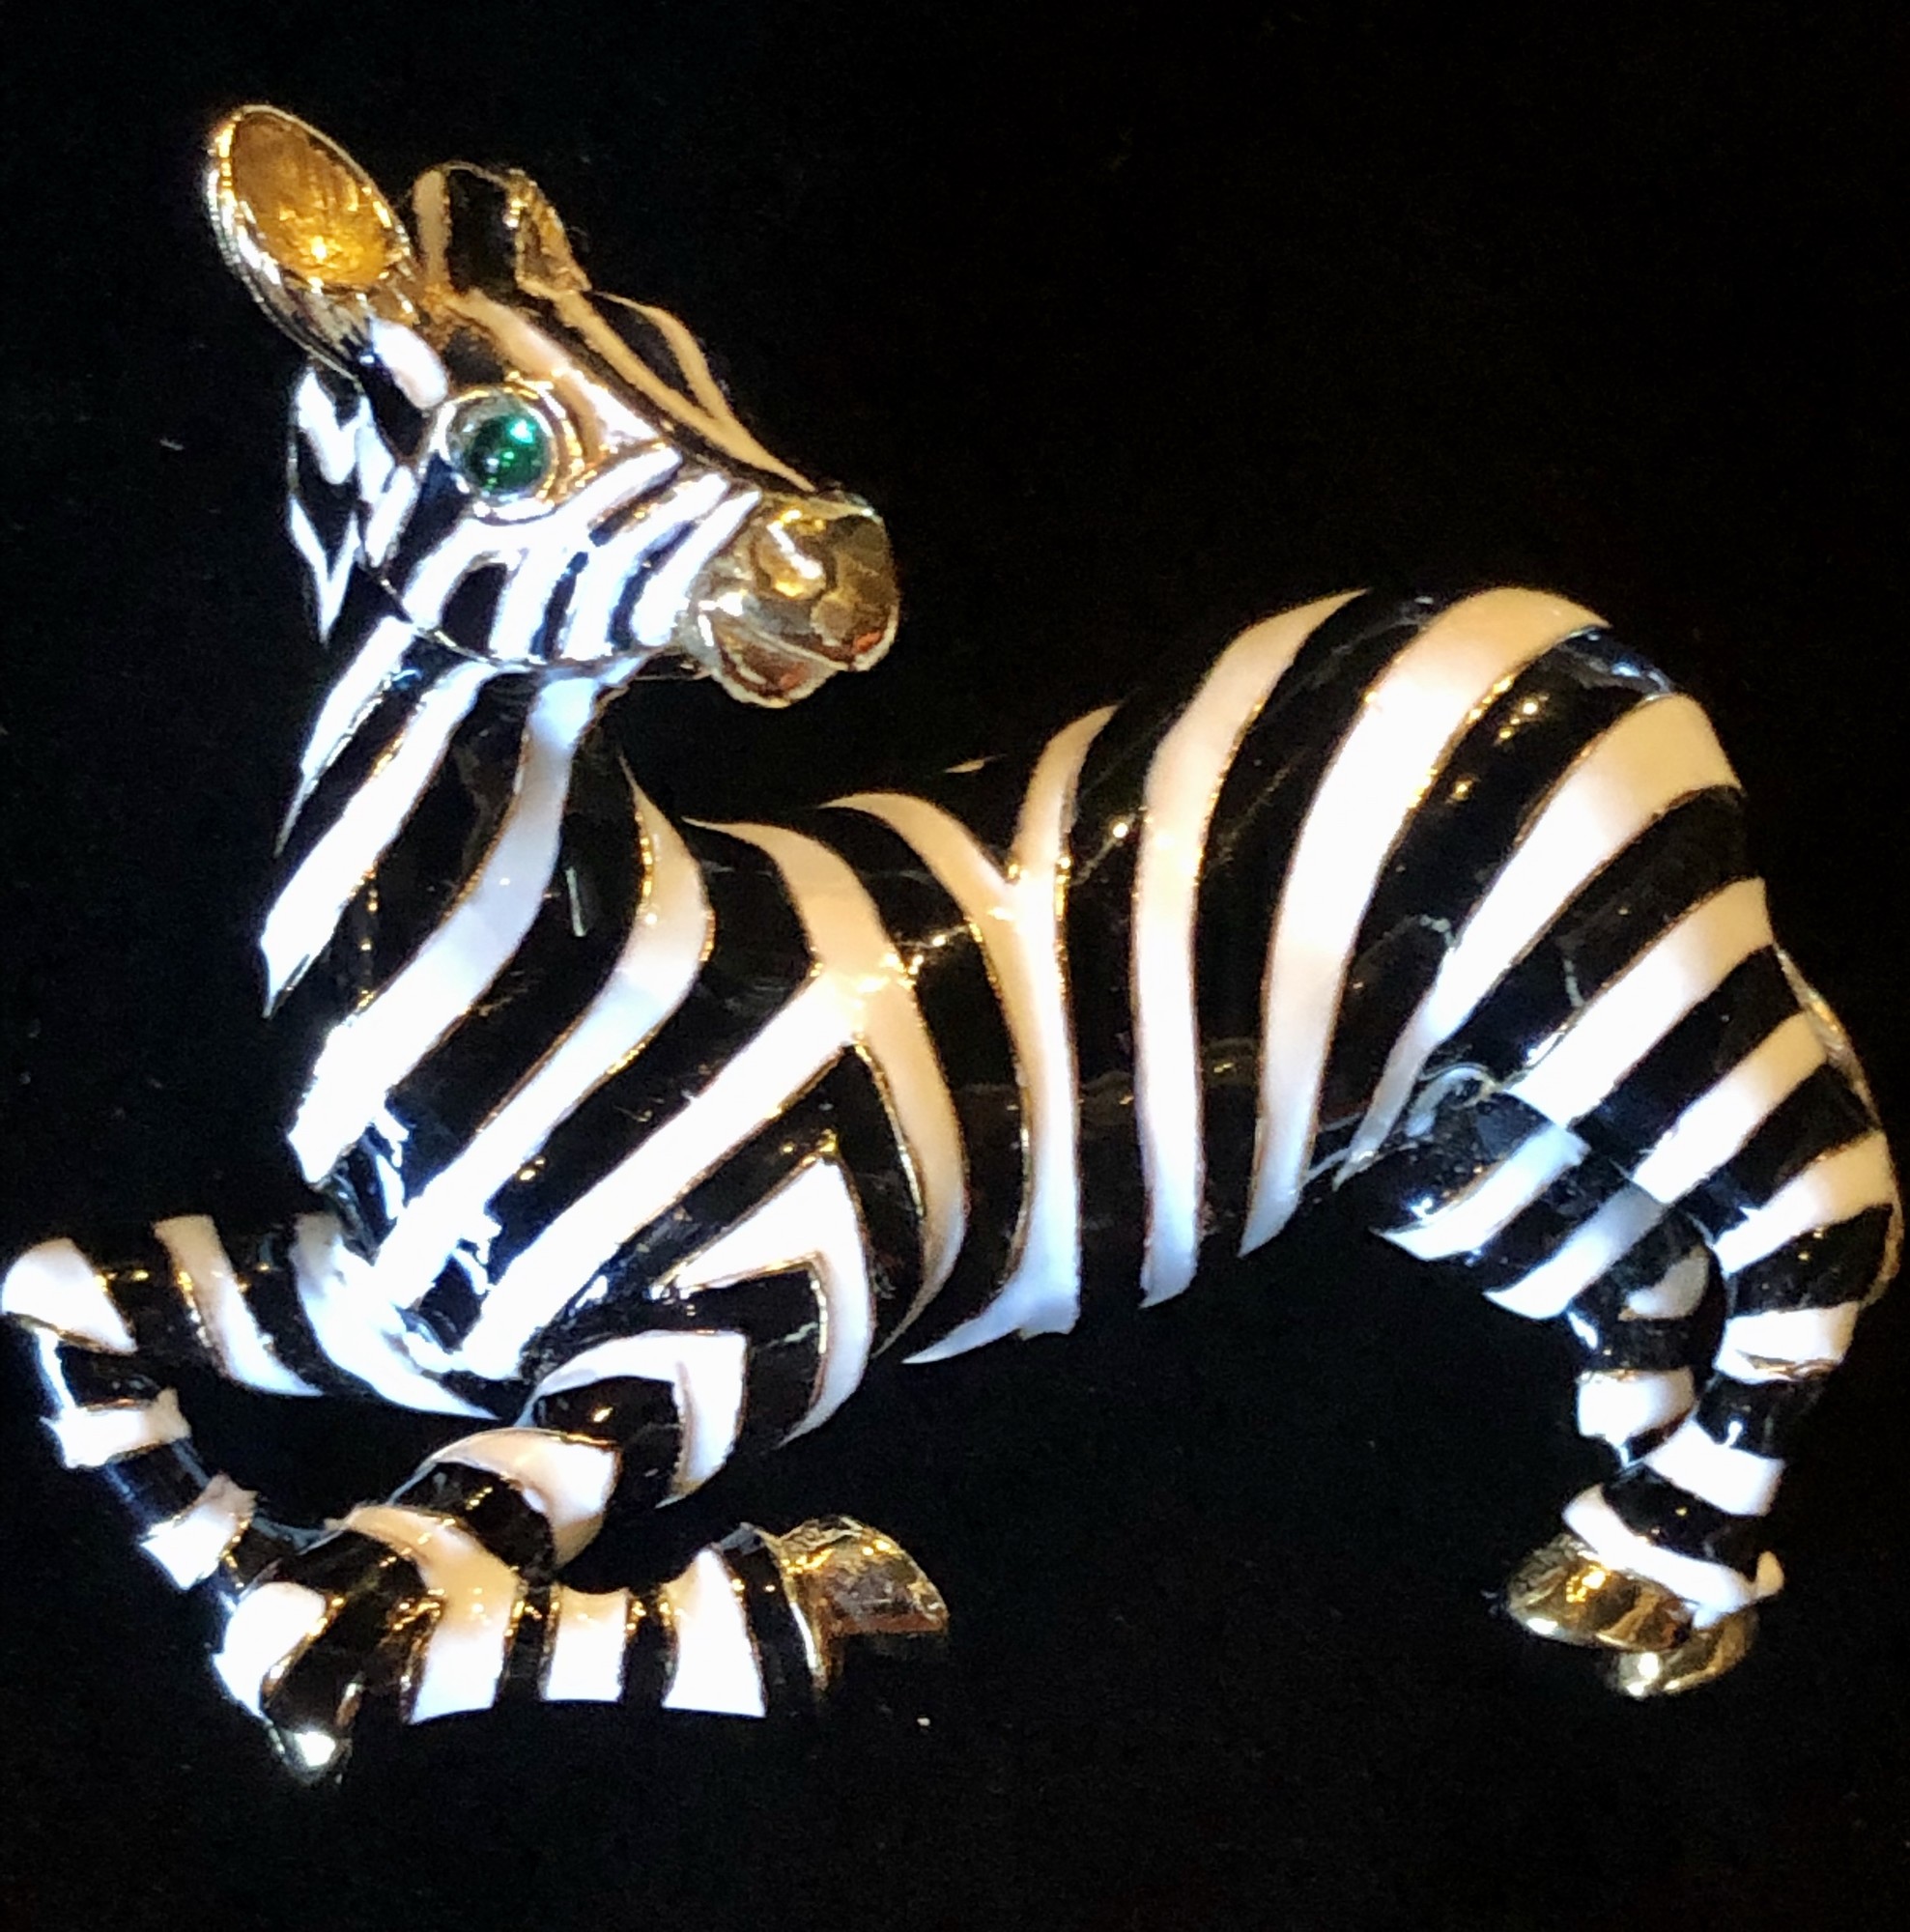 This is a Vintage Ciner Zebra Brooch, gold plate & enameled with green eyes. It's 2 3/4in x 2in and is in perfect condition.
Ciner was founded in 1892, first producing fine jewelry then transitioning to costume jewelry in 1931. All the work was still done by hand. Ciner was known for using 18k gold plating, high-quality glass beads and stones, & rich enameling giving the jewelry a substantial feel and longevity in wear. This emphasis on quality is why costume jewelry collectors prize vintage Ciner pieces today.